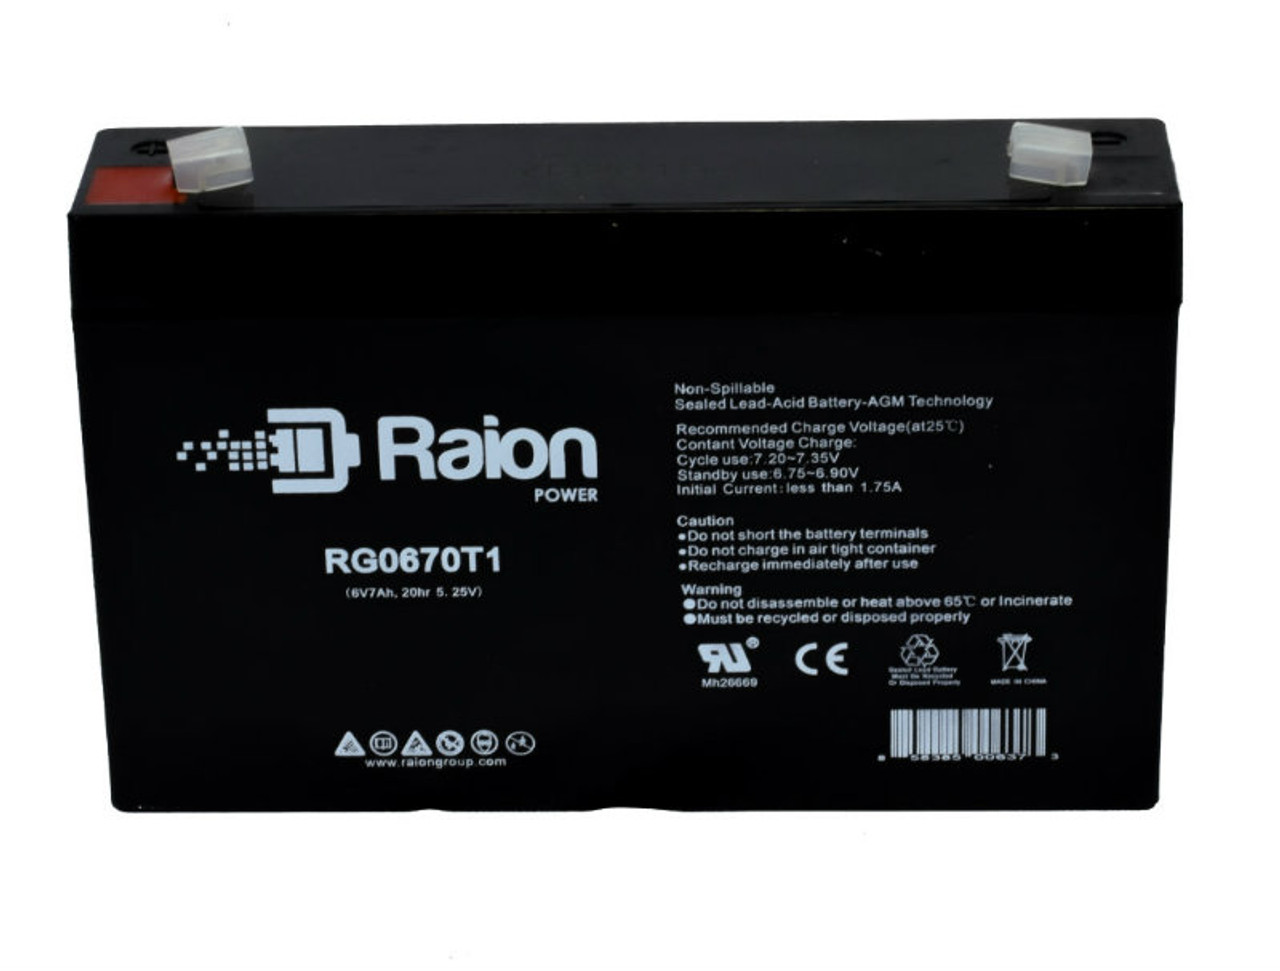 Raion Power RG0670T1 Replacement Battery Cartridge for Pace Tech Inc. 2200 ECG MONITOR BACKUP